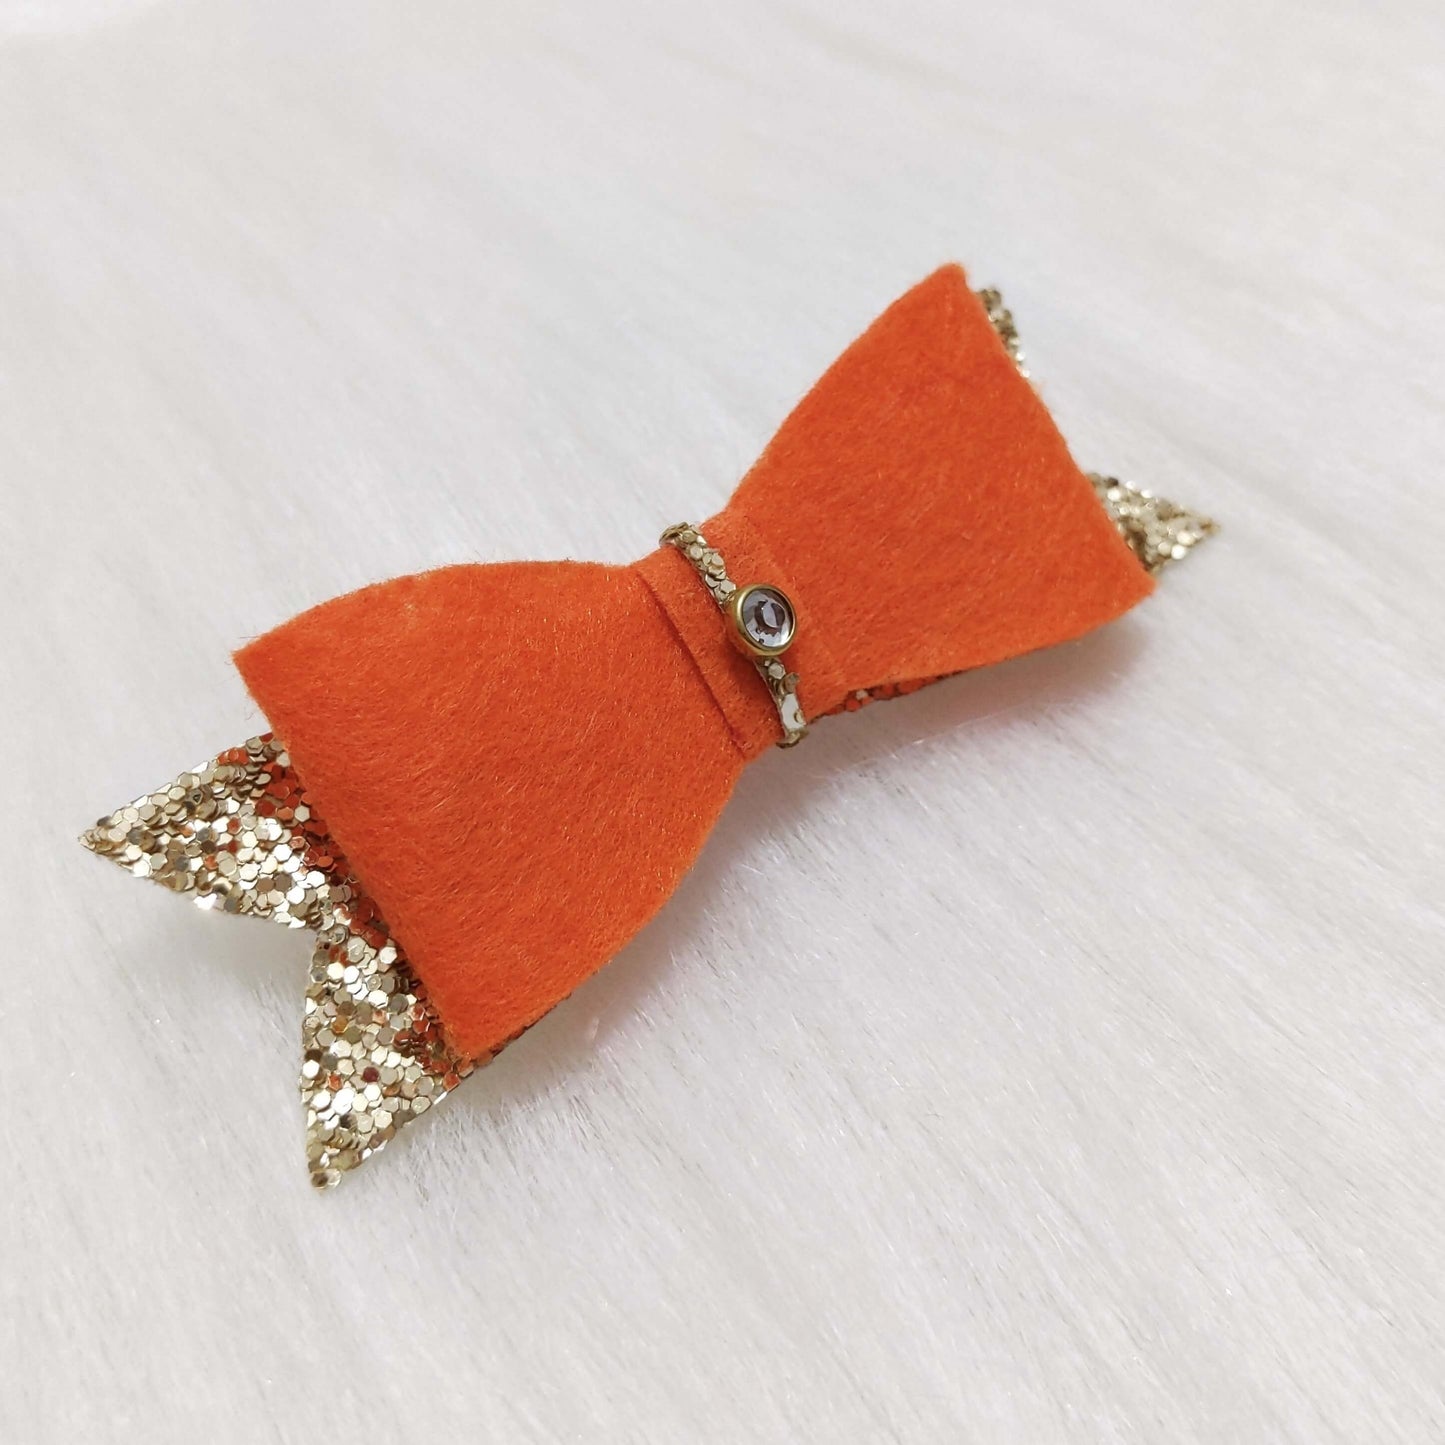 Neon Orange Bow Hair Clip | Hair Accessories for Kids and Girls